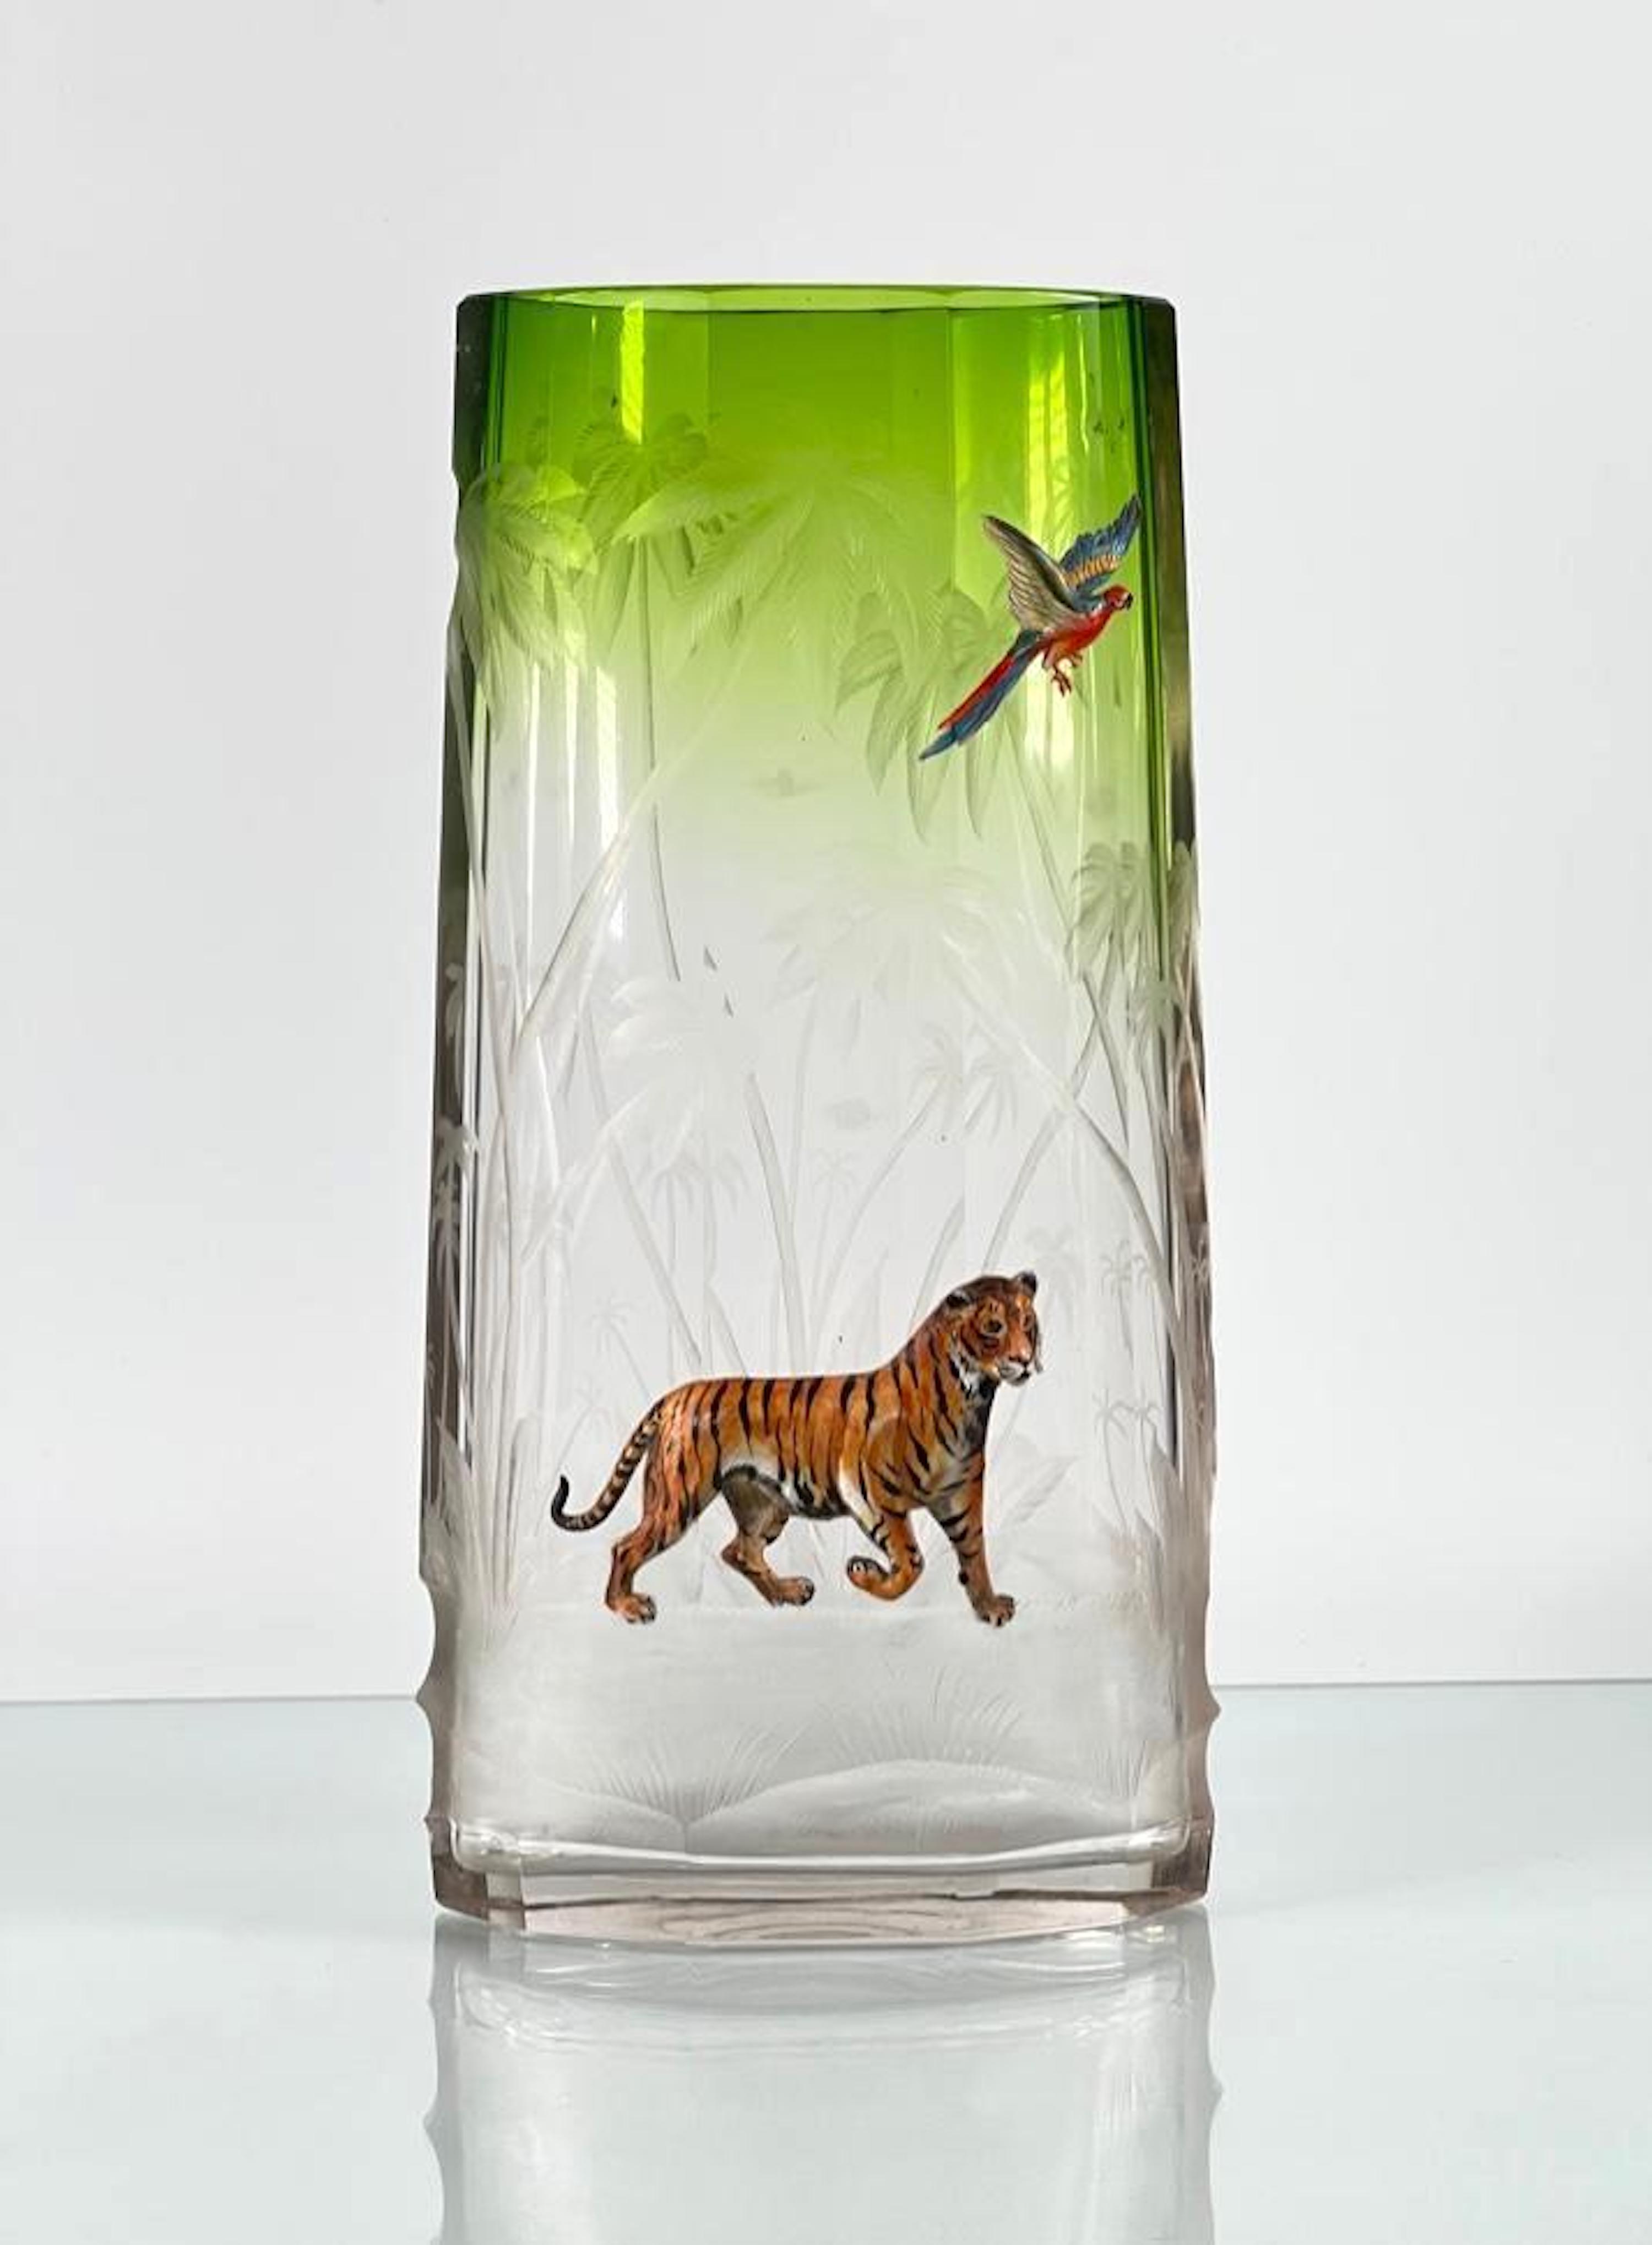 Circa-1890-1900 Moser vase with high relief sculpted enamel figures of a tiger and a parrot, est. $1,200-$1,800